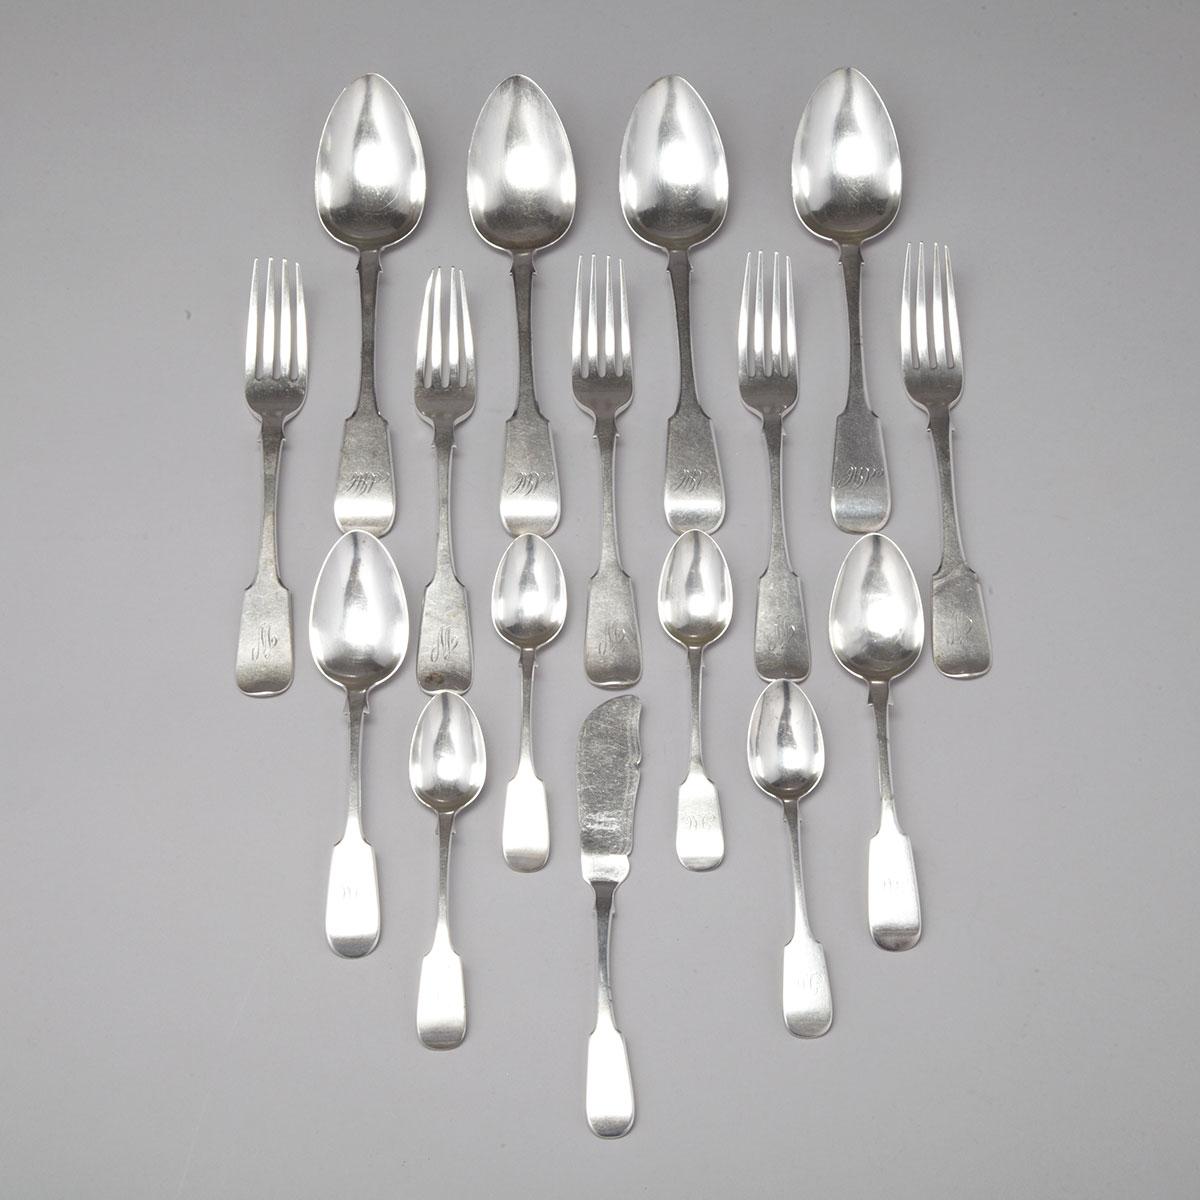 Canadian Silver Fiddle Pattern Flatware, George Savage and Savage & Lyman, Montreal, Que., c.1820-60